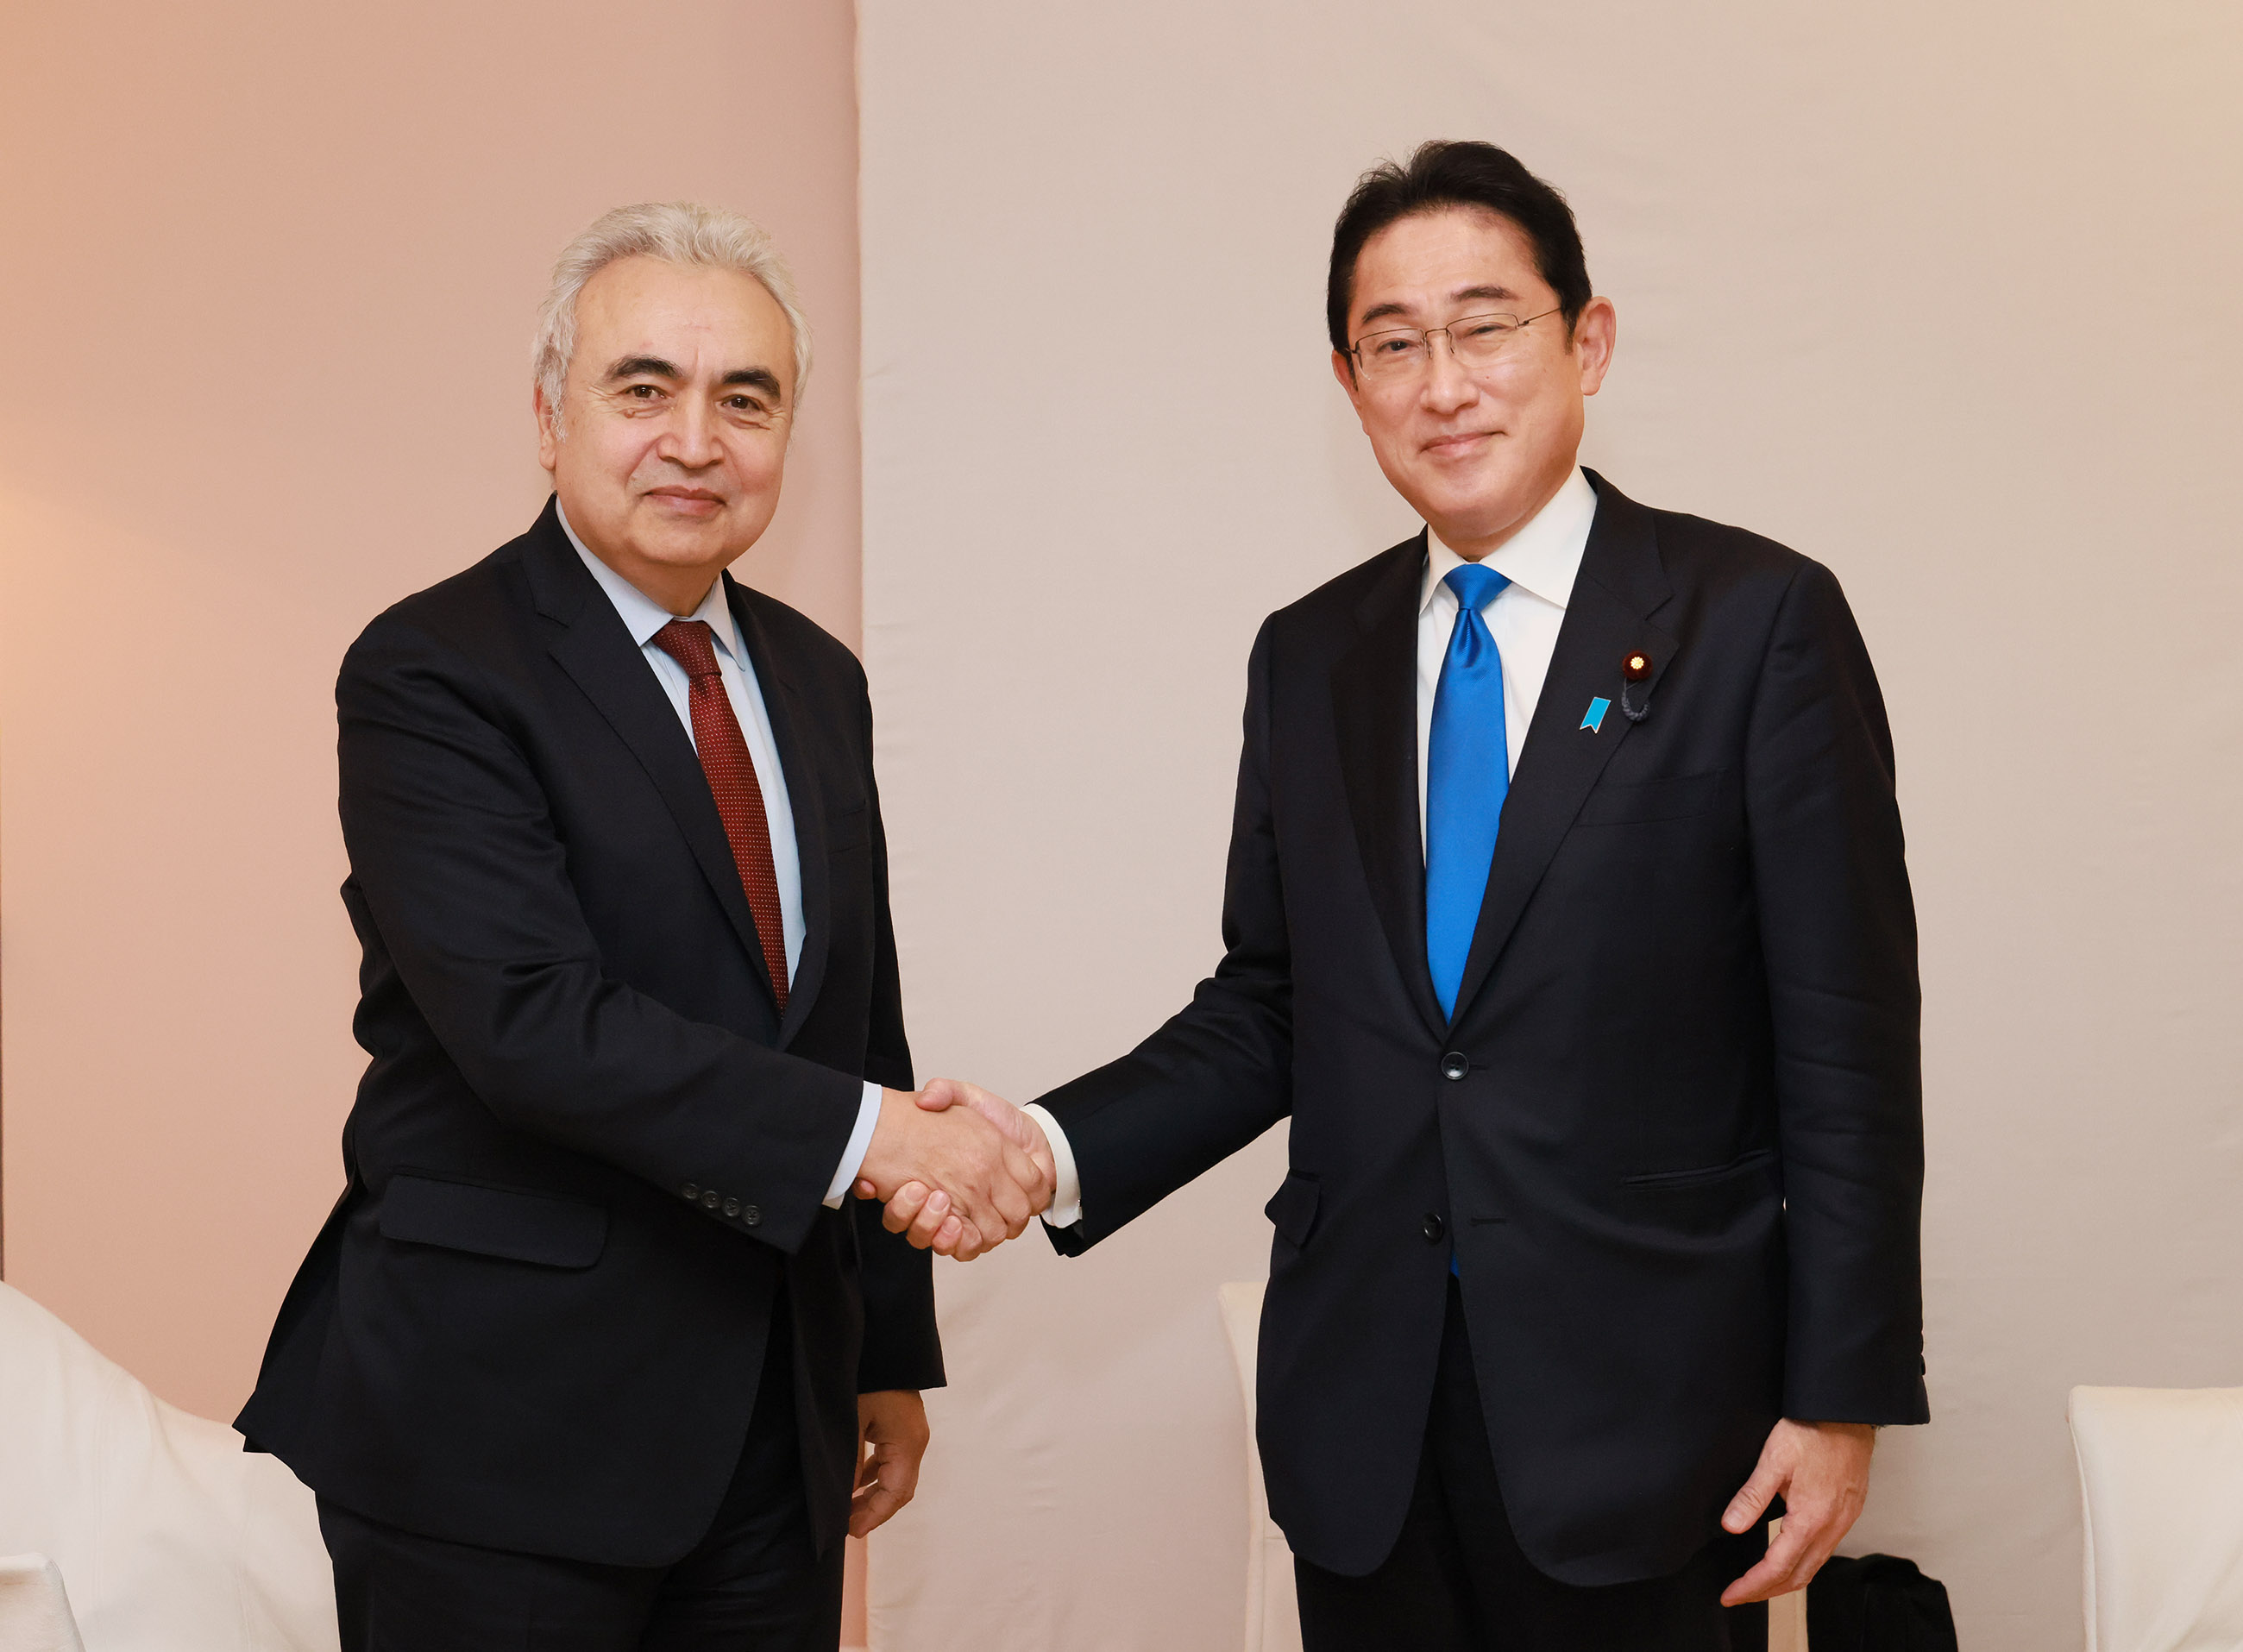 Prime Minister Kishida holding a meeting with President Fabius of the Constitutional Council